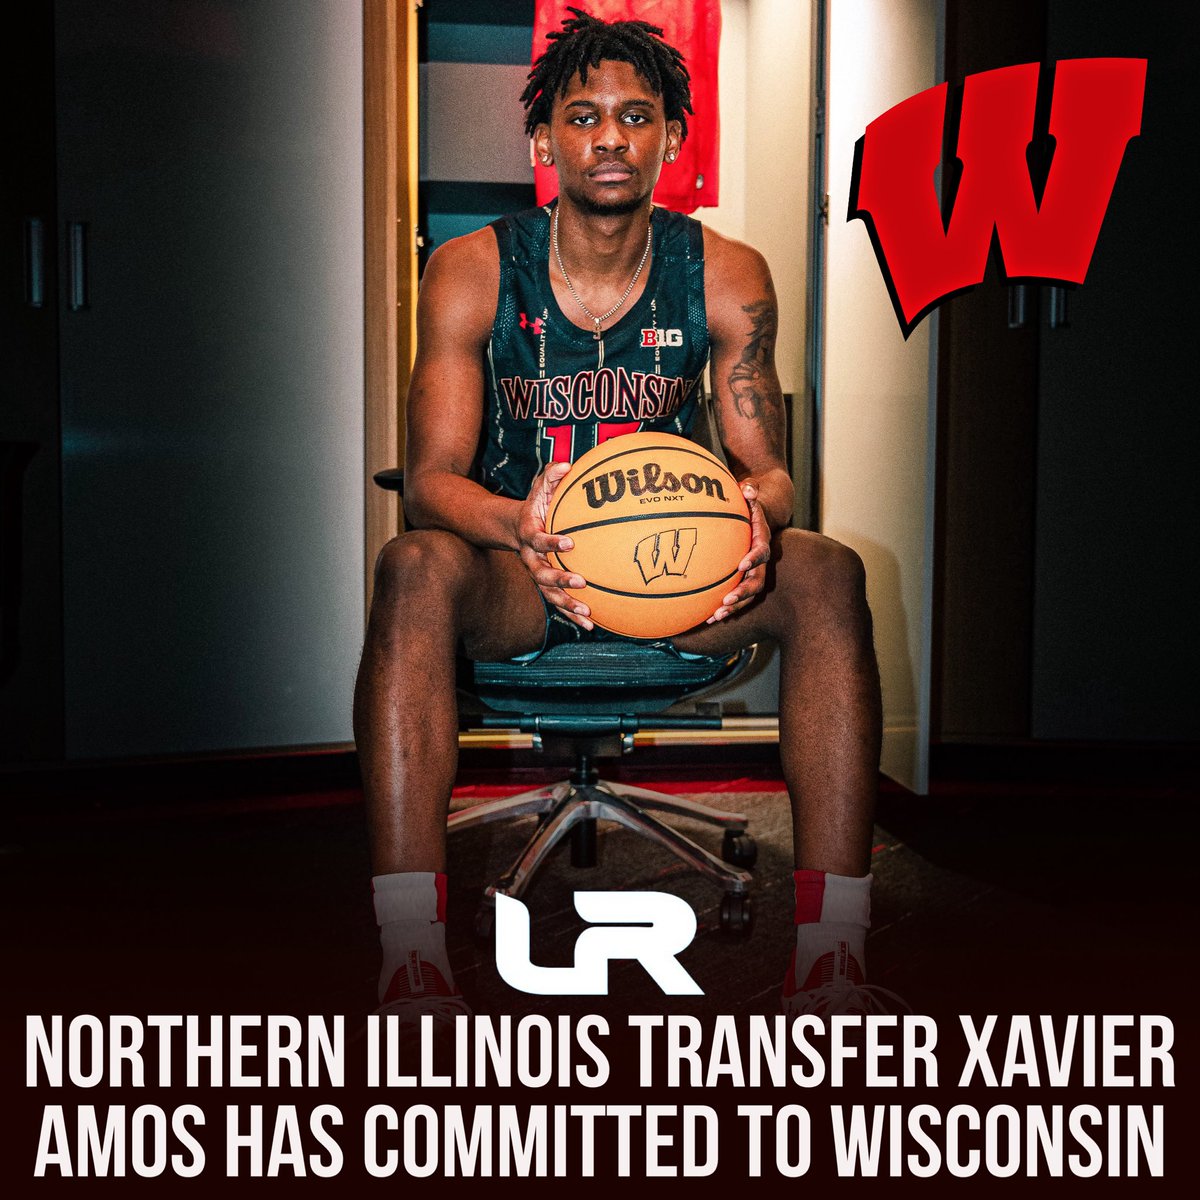 NEWS: Northern Illinois transfer Xavier Amos has committed to Wisconsin and Greg Gard, he told @LeagueRDY. Amos is a Chicago native who spent the first two seasons of his collegiate career at NIU. He started all 25 games played this season. He averaged 13.8PPG. 5.8RPG, 1.2APG